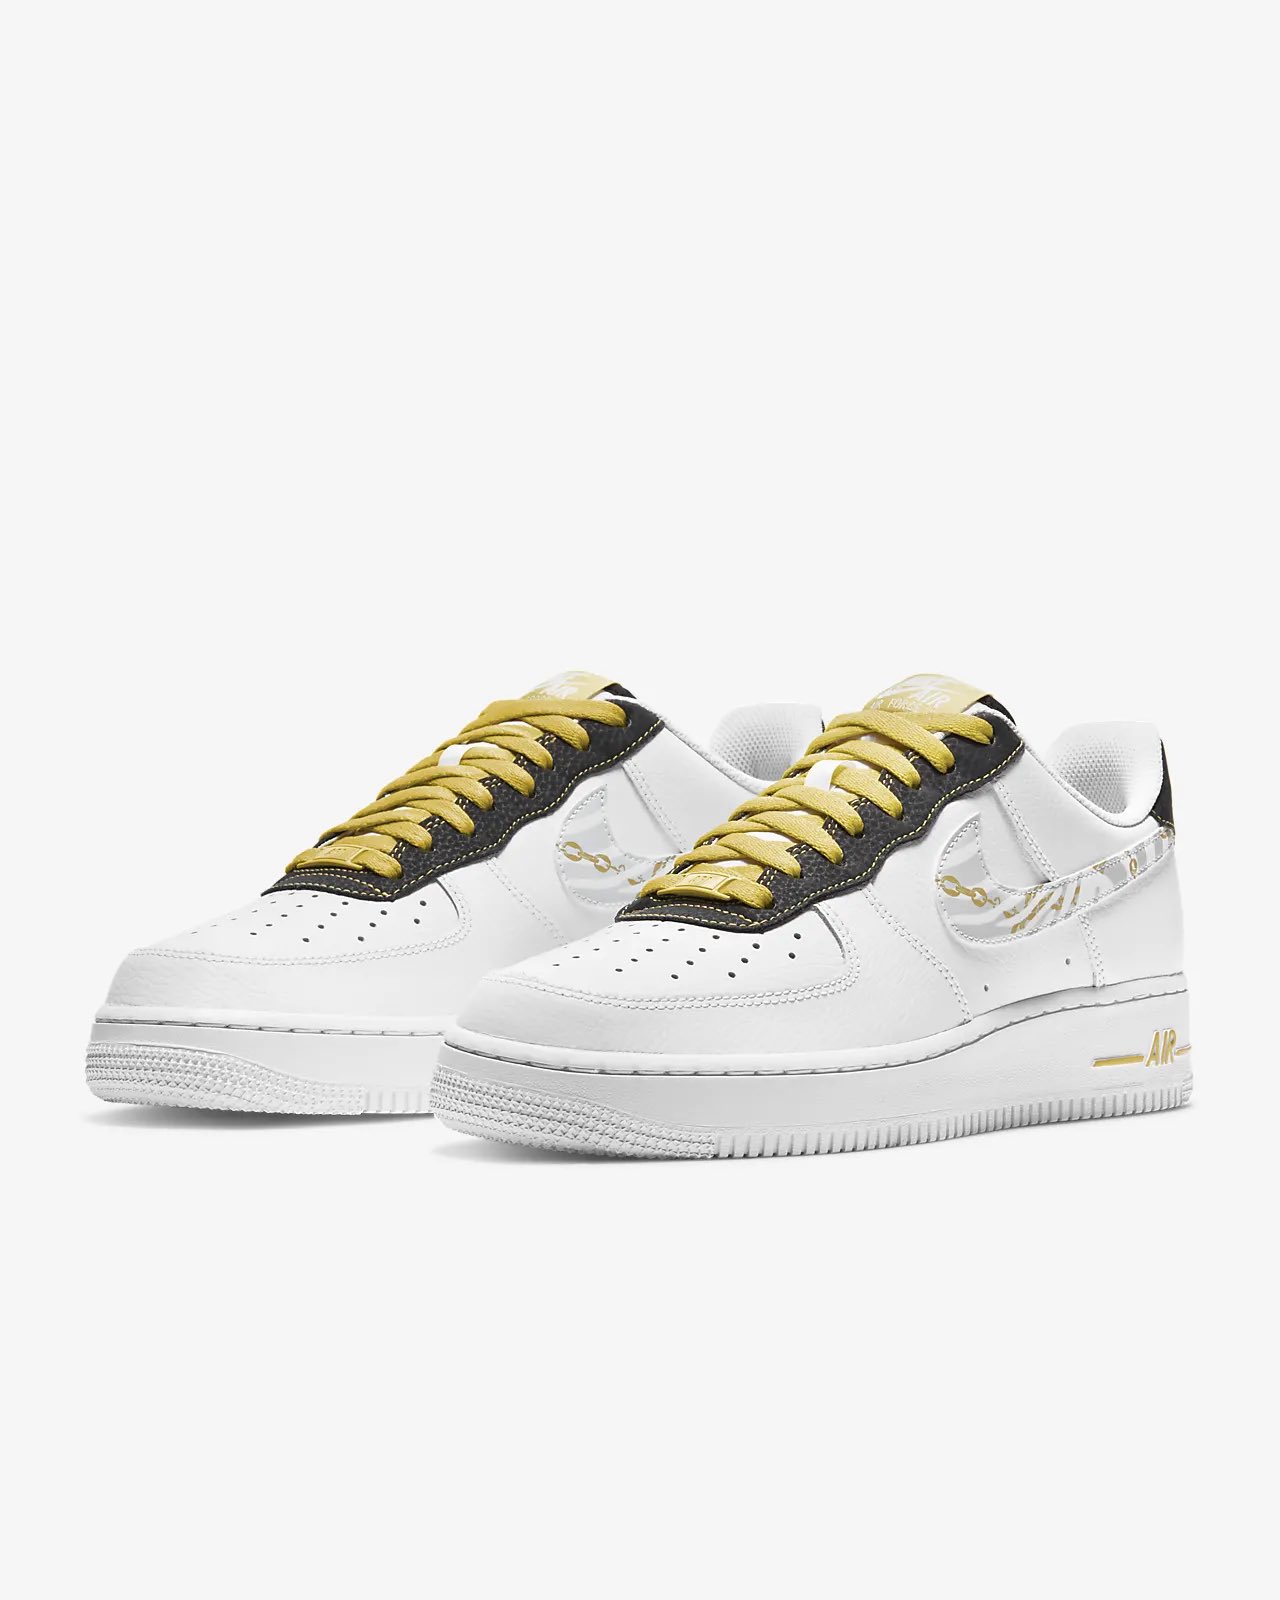 SNKR_TWITR on X: Nike Air Force 1 High '07 LV8 Under Construction